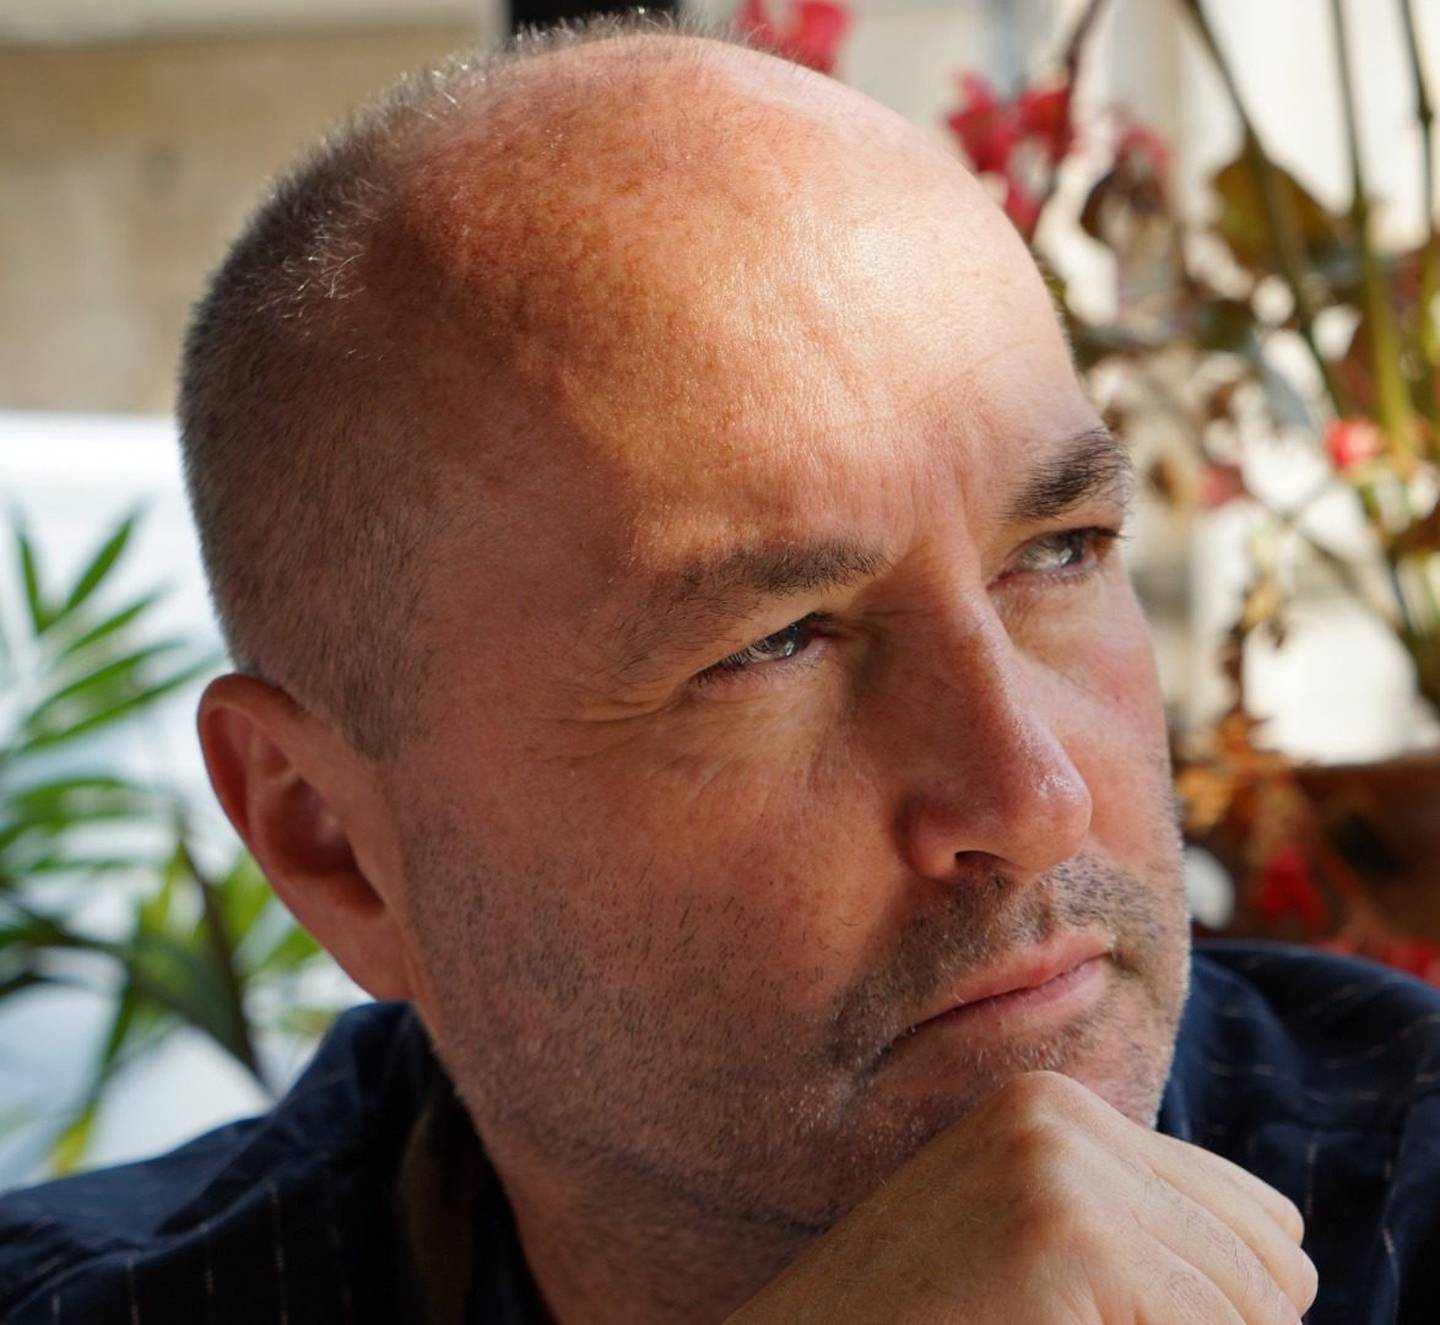 Evening with author Colum McCann
will be held at Fenagh Arts Centre